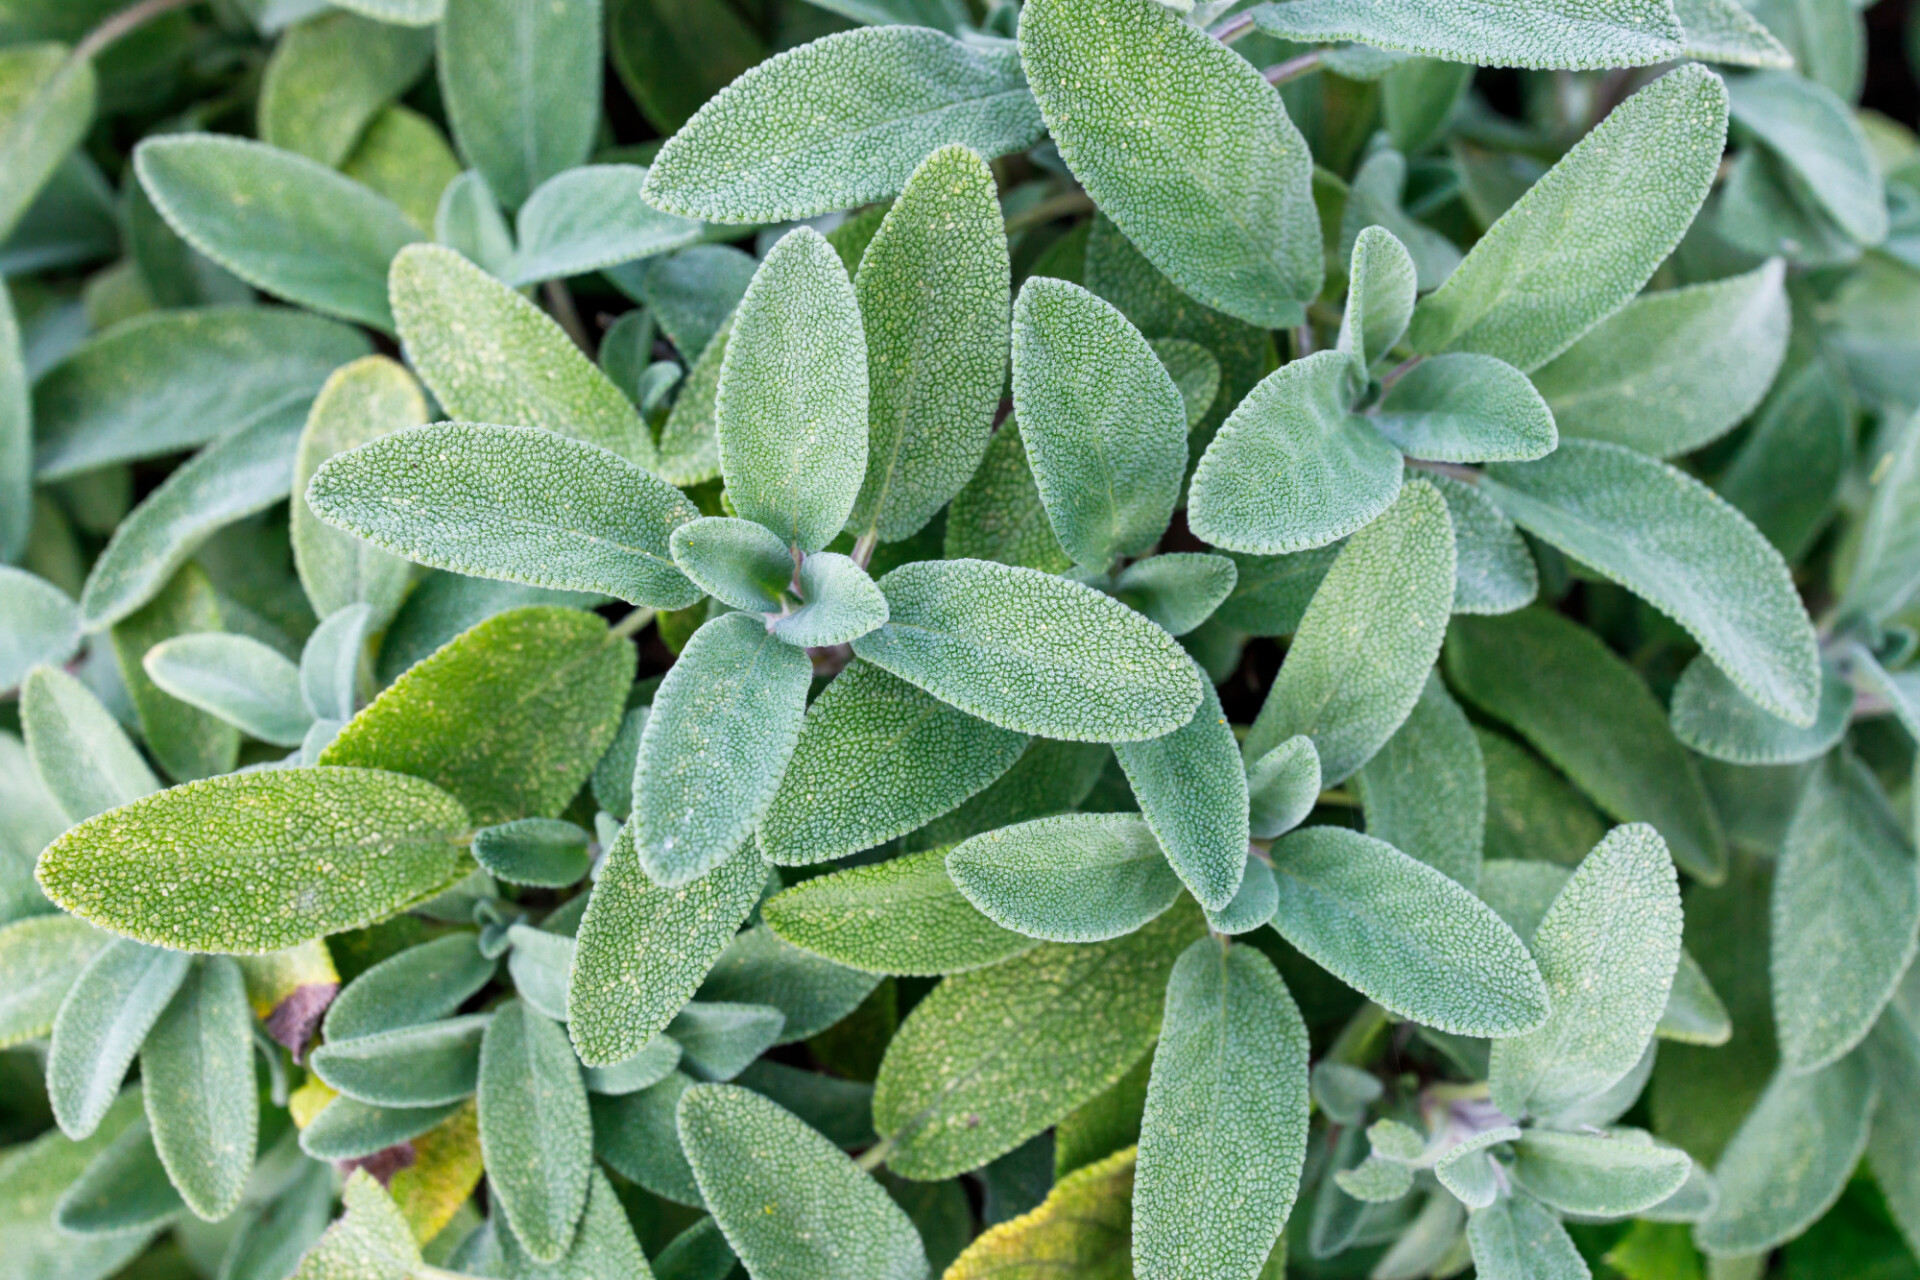 Sage all over the place